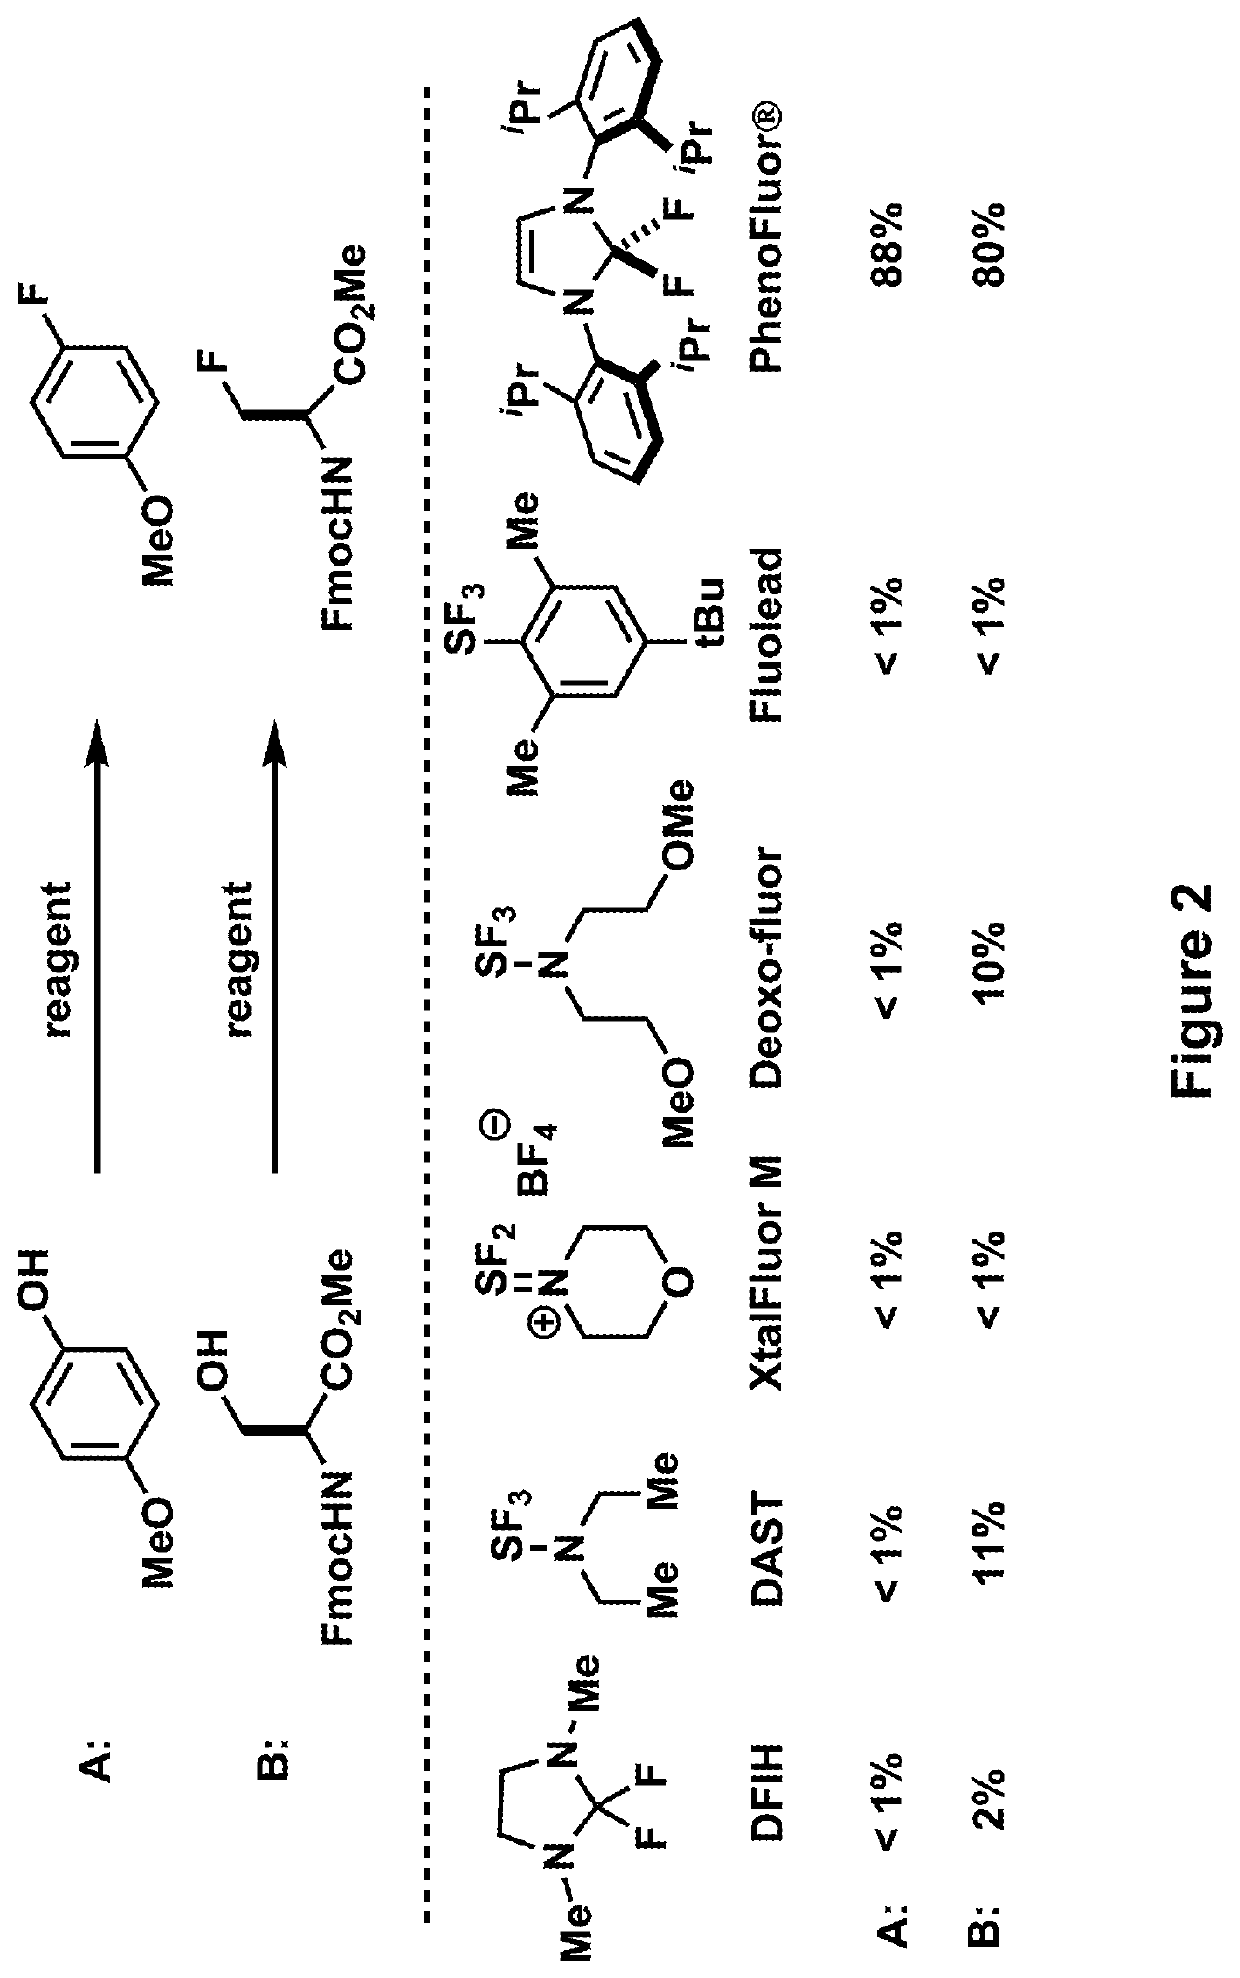 Fluorination of organic compounds